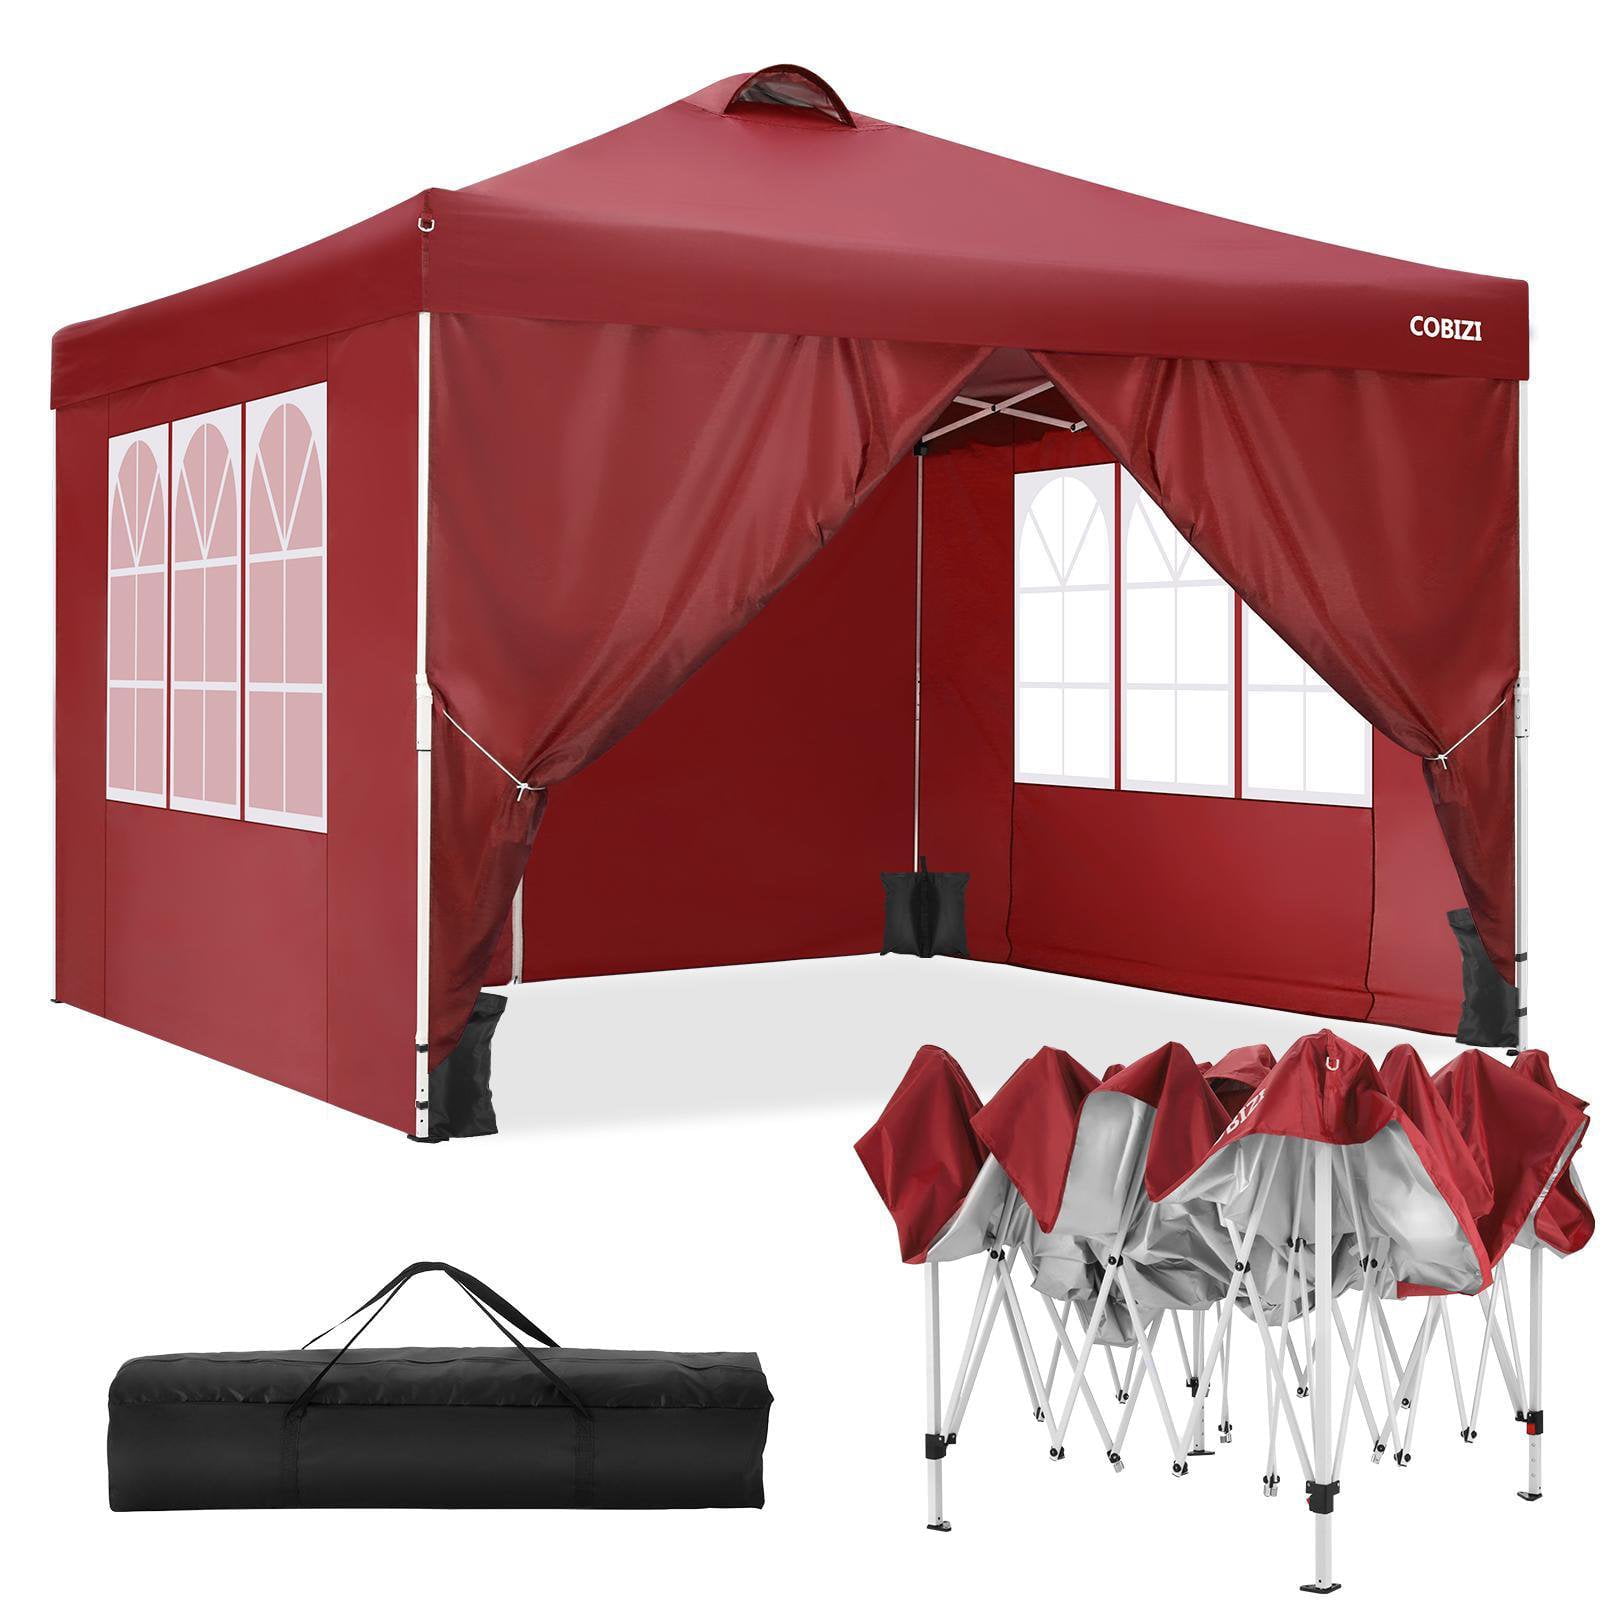 10' x 10' Straight Leg Pop-up Canopy Tent Easy One Person Setup